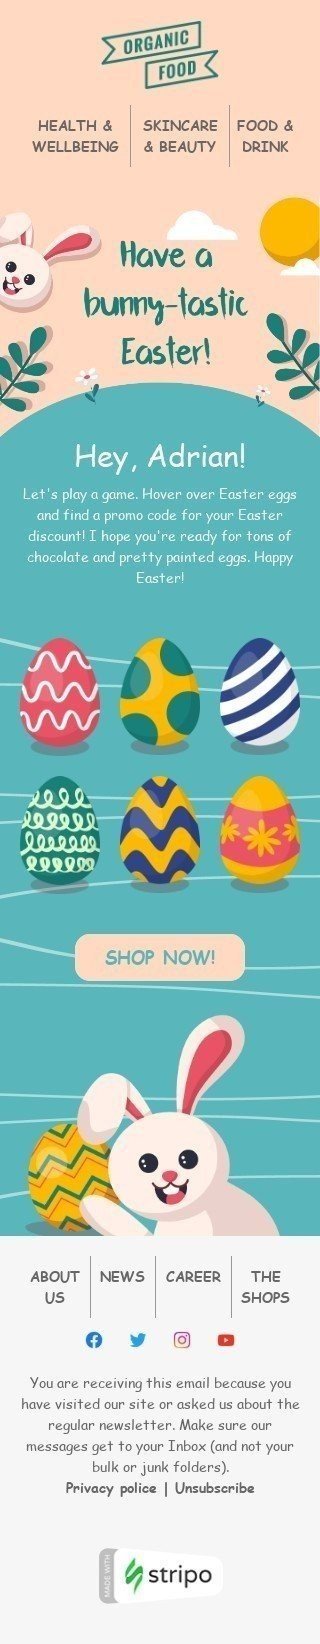 Easter Email Template "Have a bunny-tastic Easter!" for Organic & Eco Goods industry mobile view